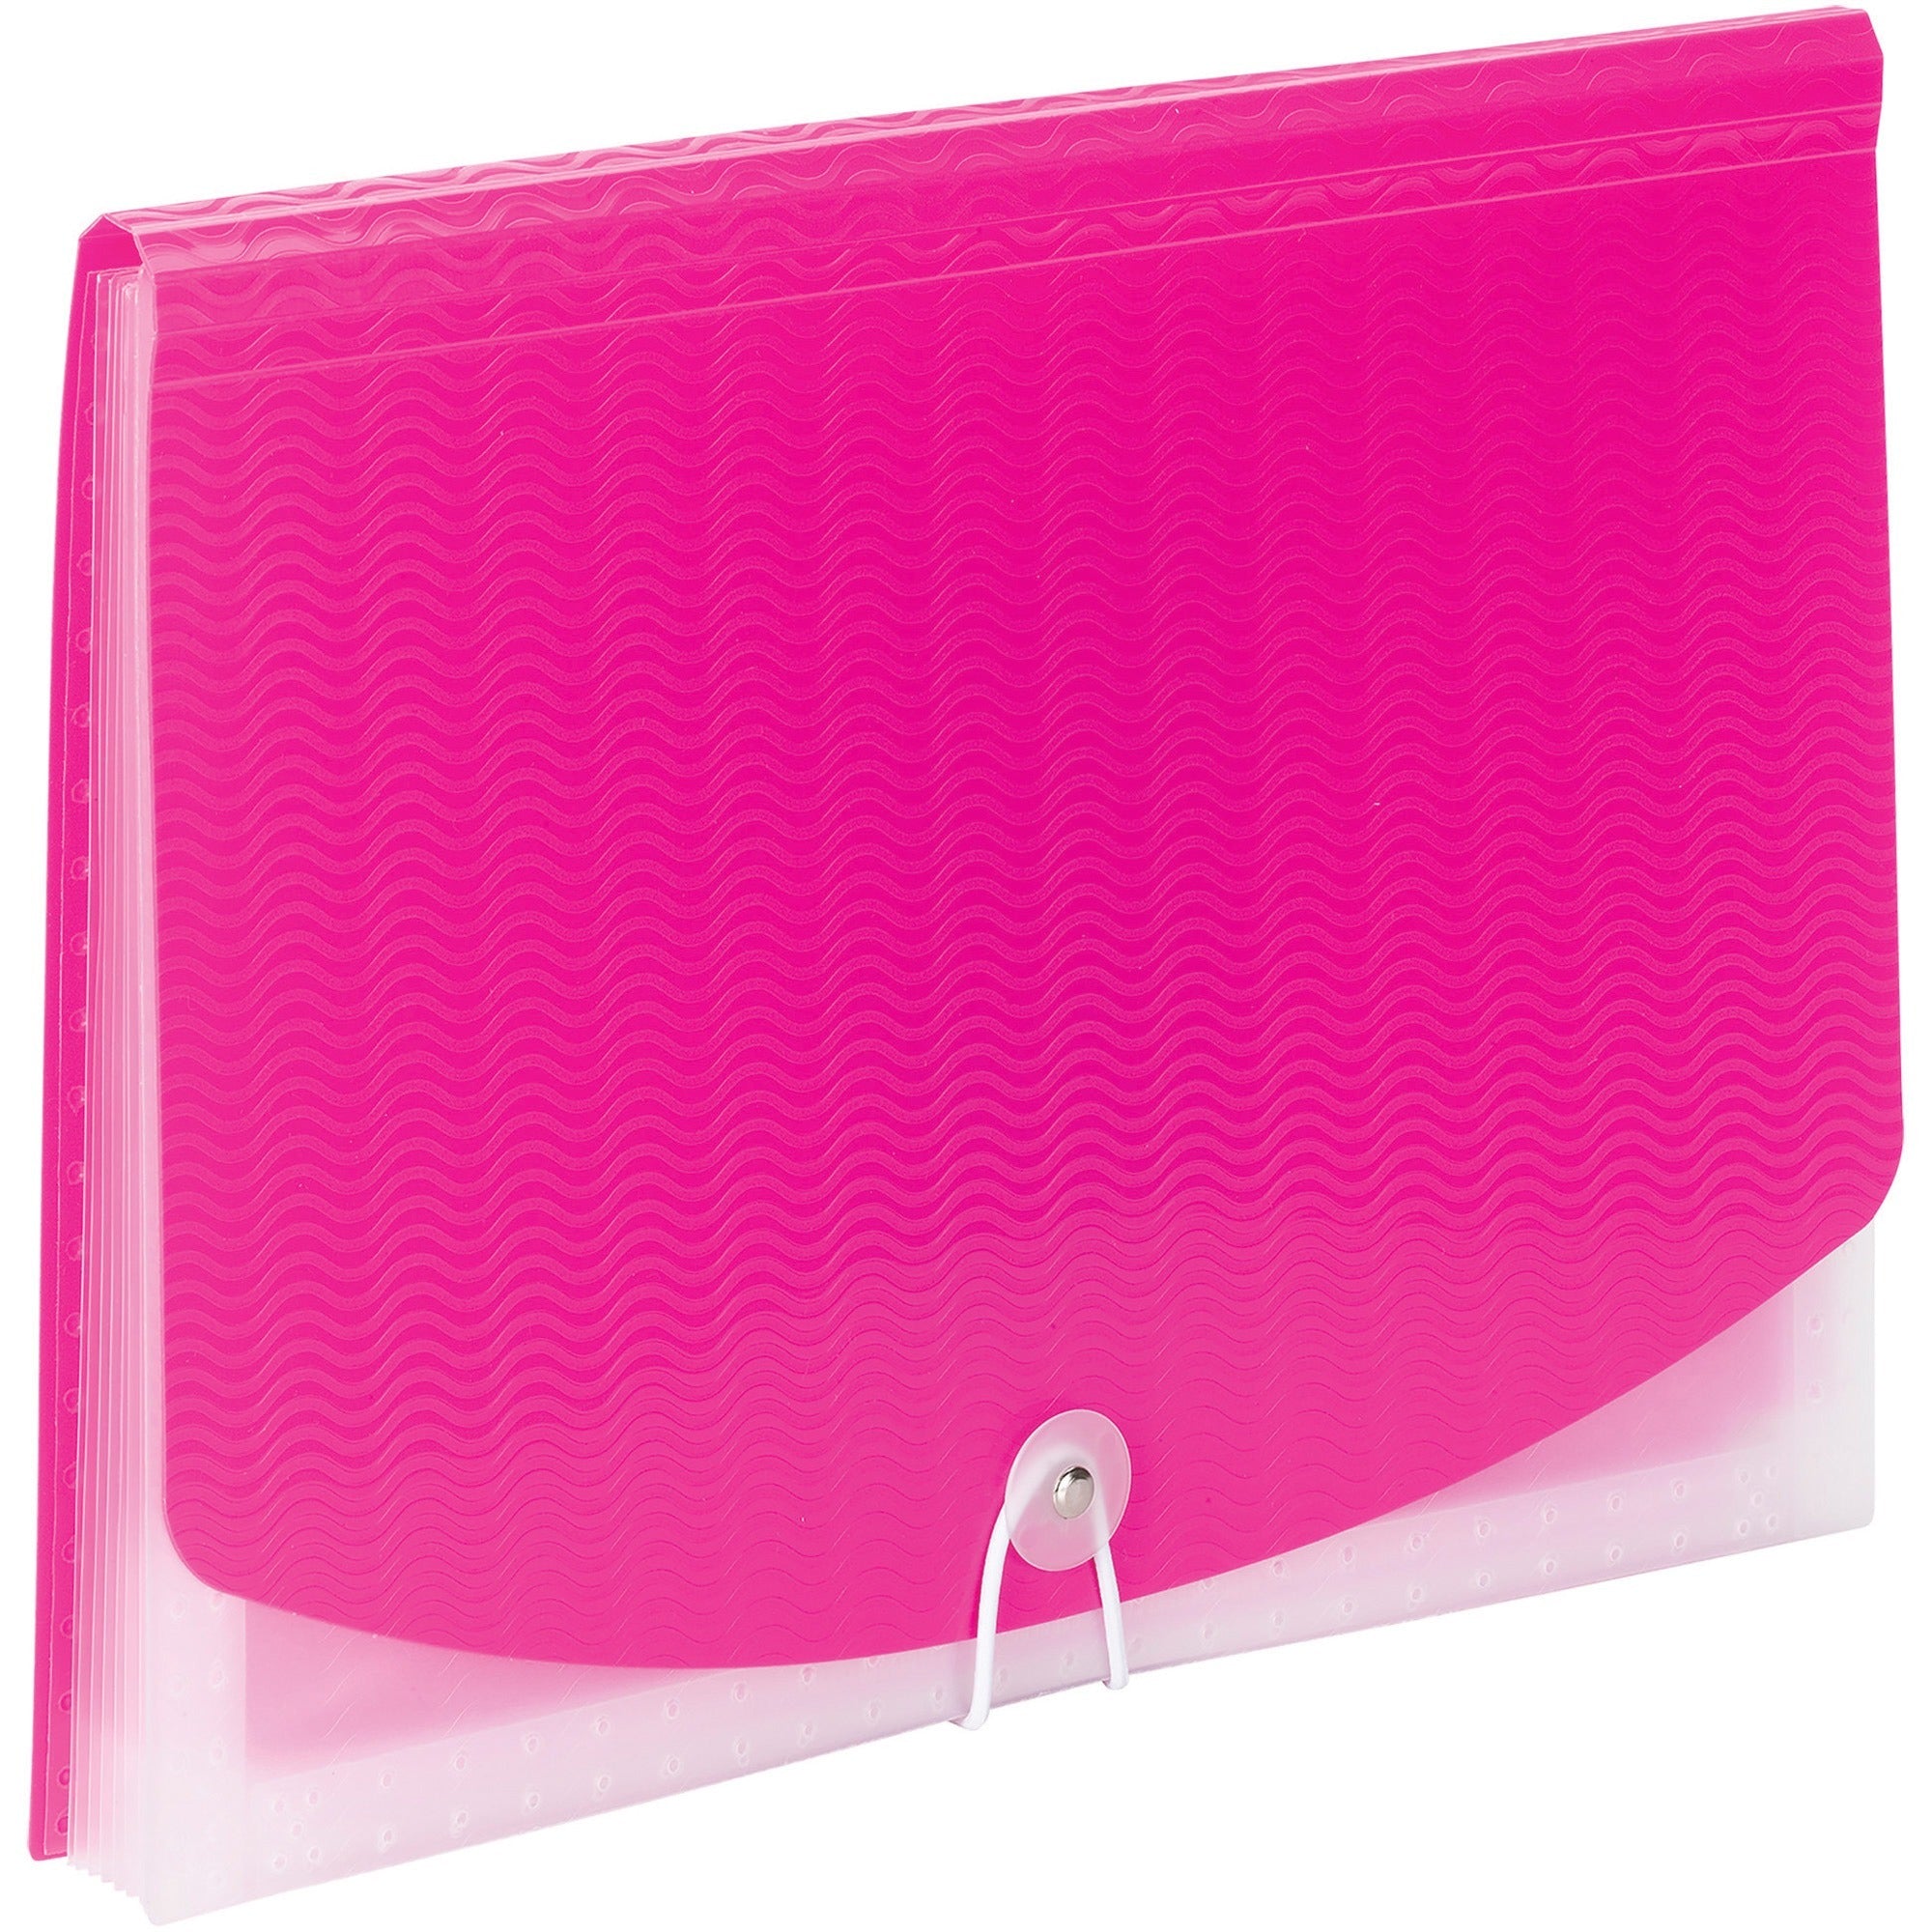 smead-letter-expanding-file-8-1-2-x-11-7-pockets-6-dividers-multi-colored-pink-clear-1-each_smd70874 - 1